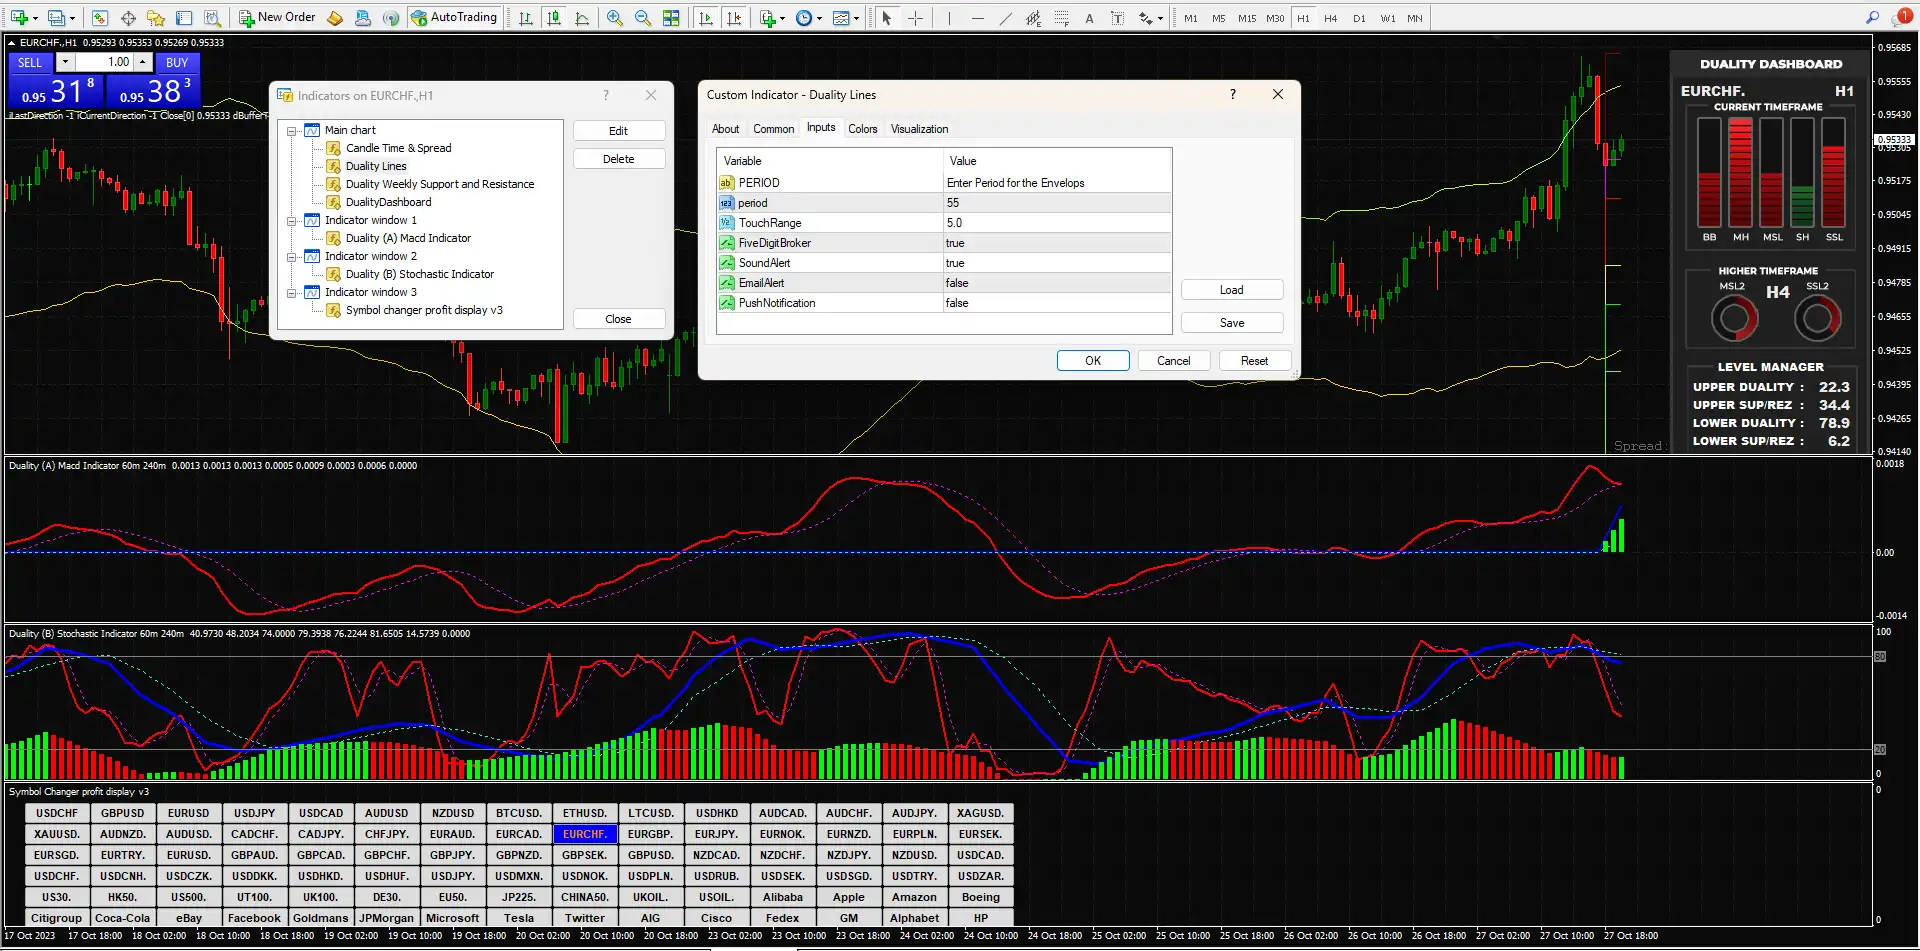 Duality Trading System Indicators MT4 – Free Download - Duality Trading System Indicators